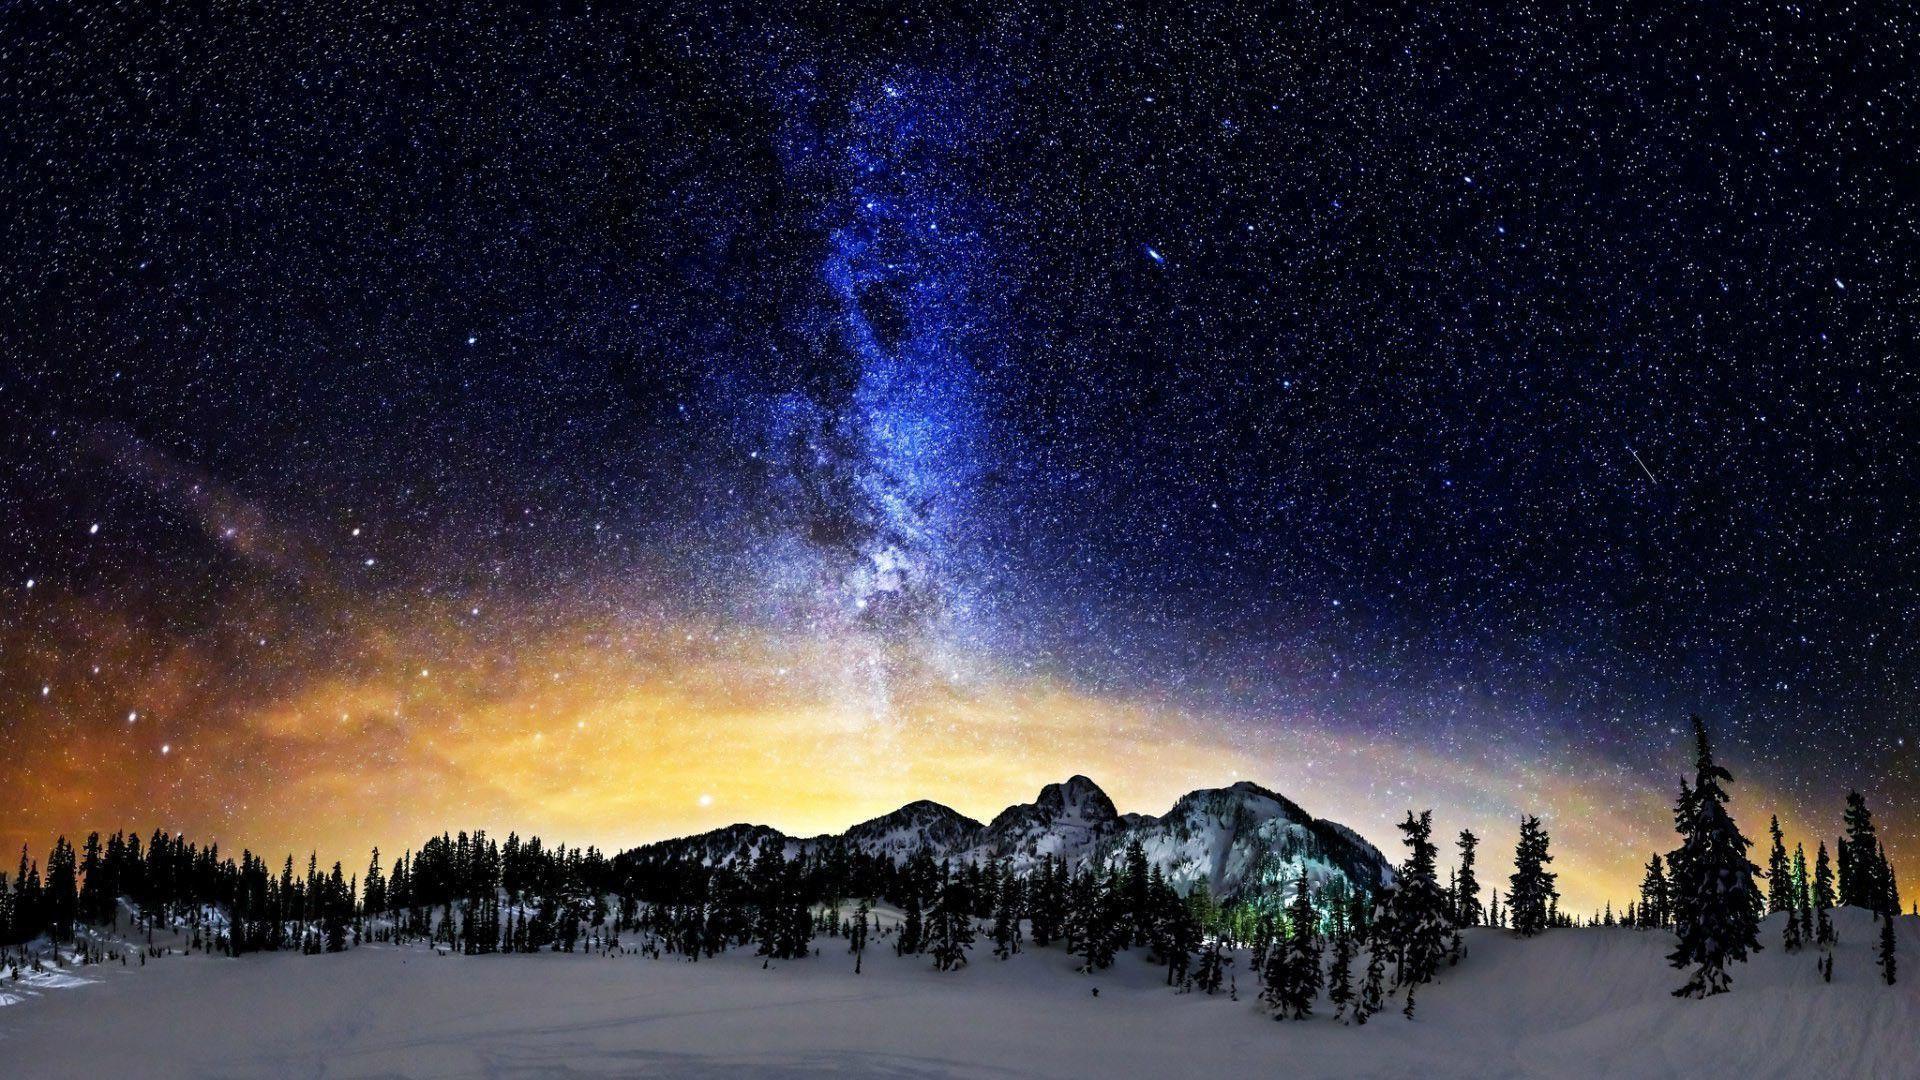 Milky Way above the snowy mountains wallpapers